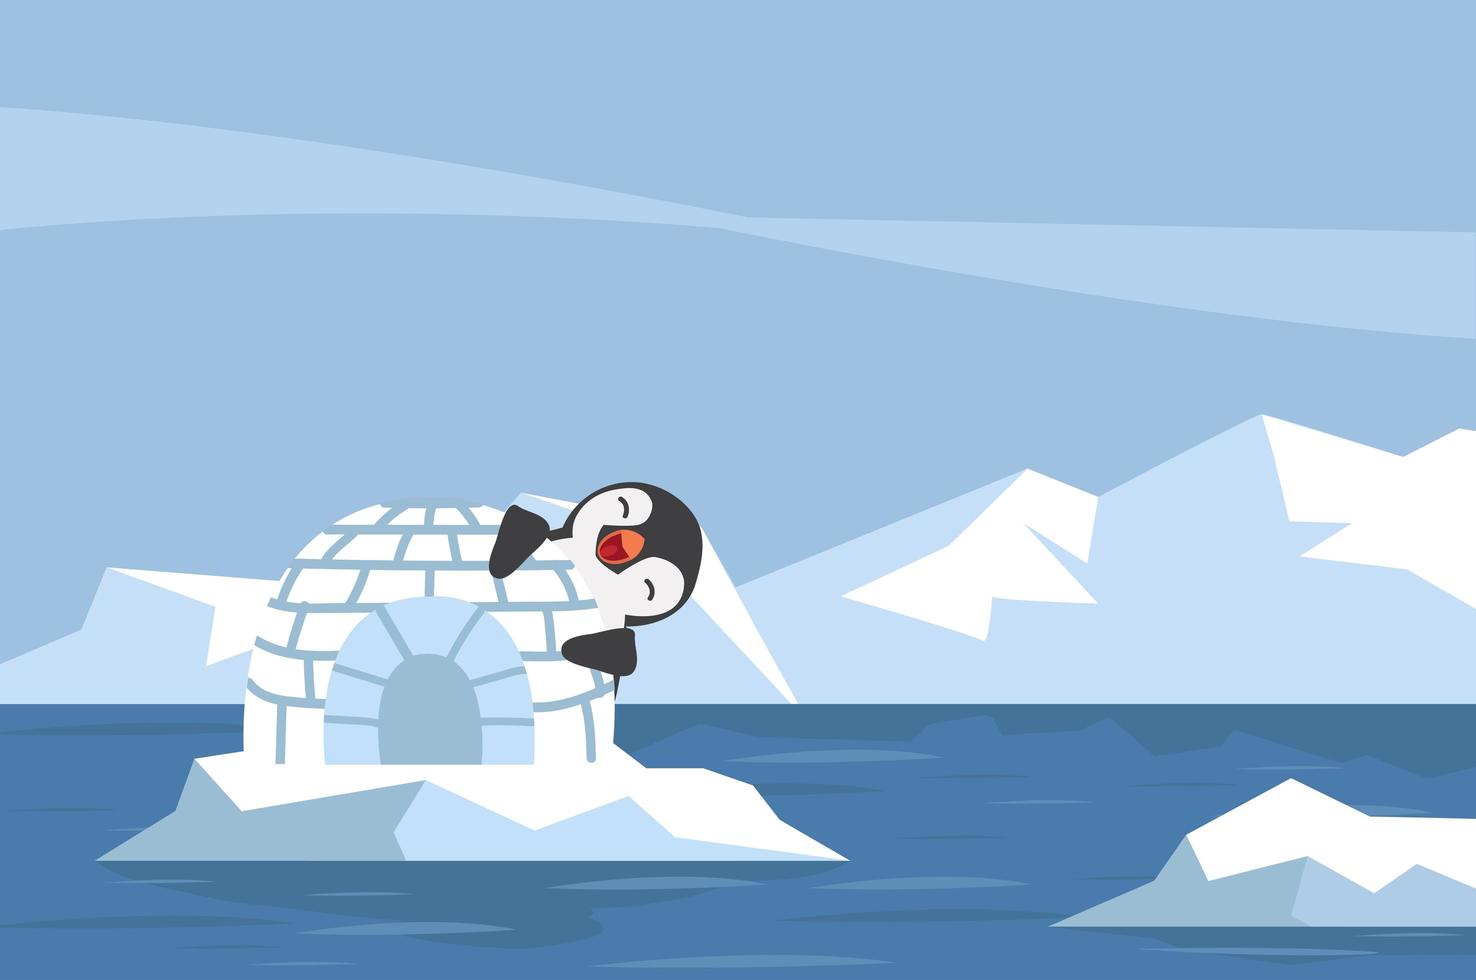 Penguin with igloo ice house on the Artic landscape vector